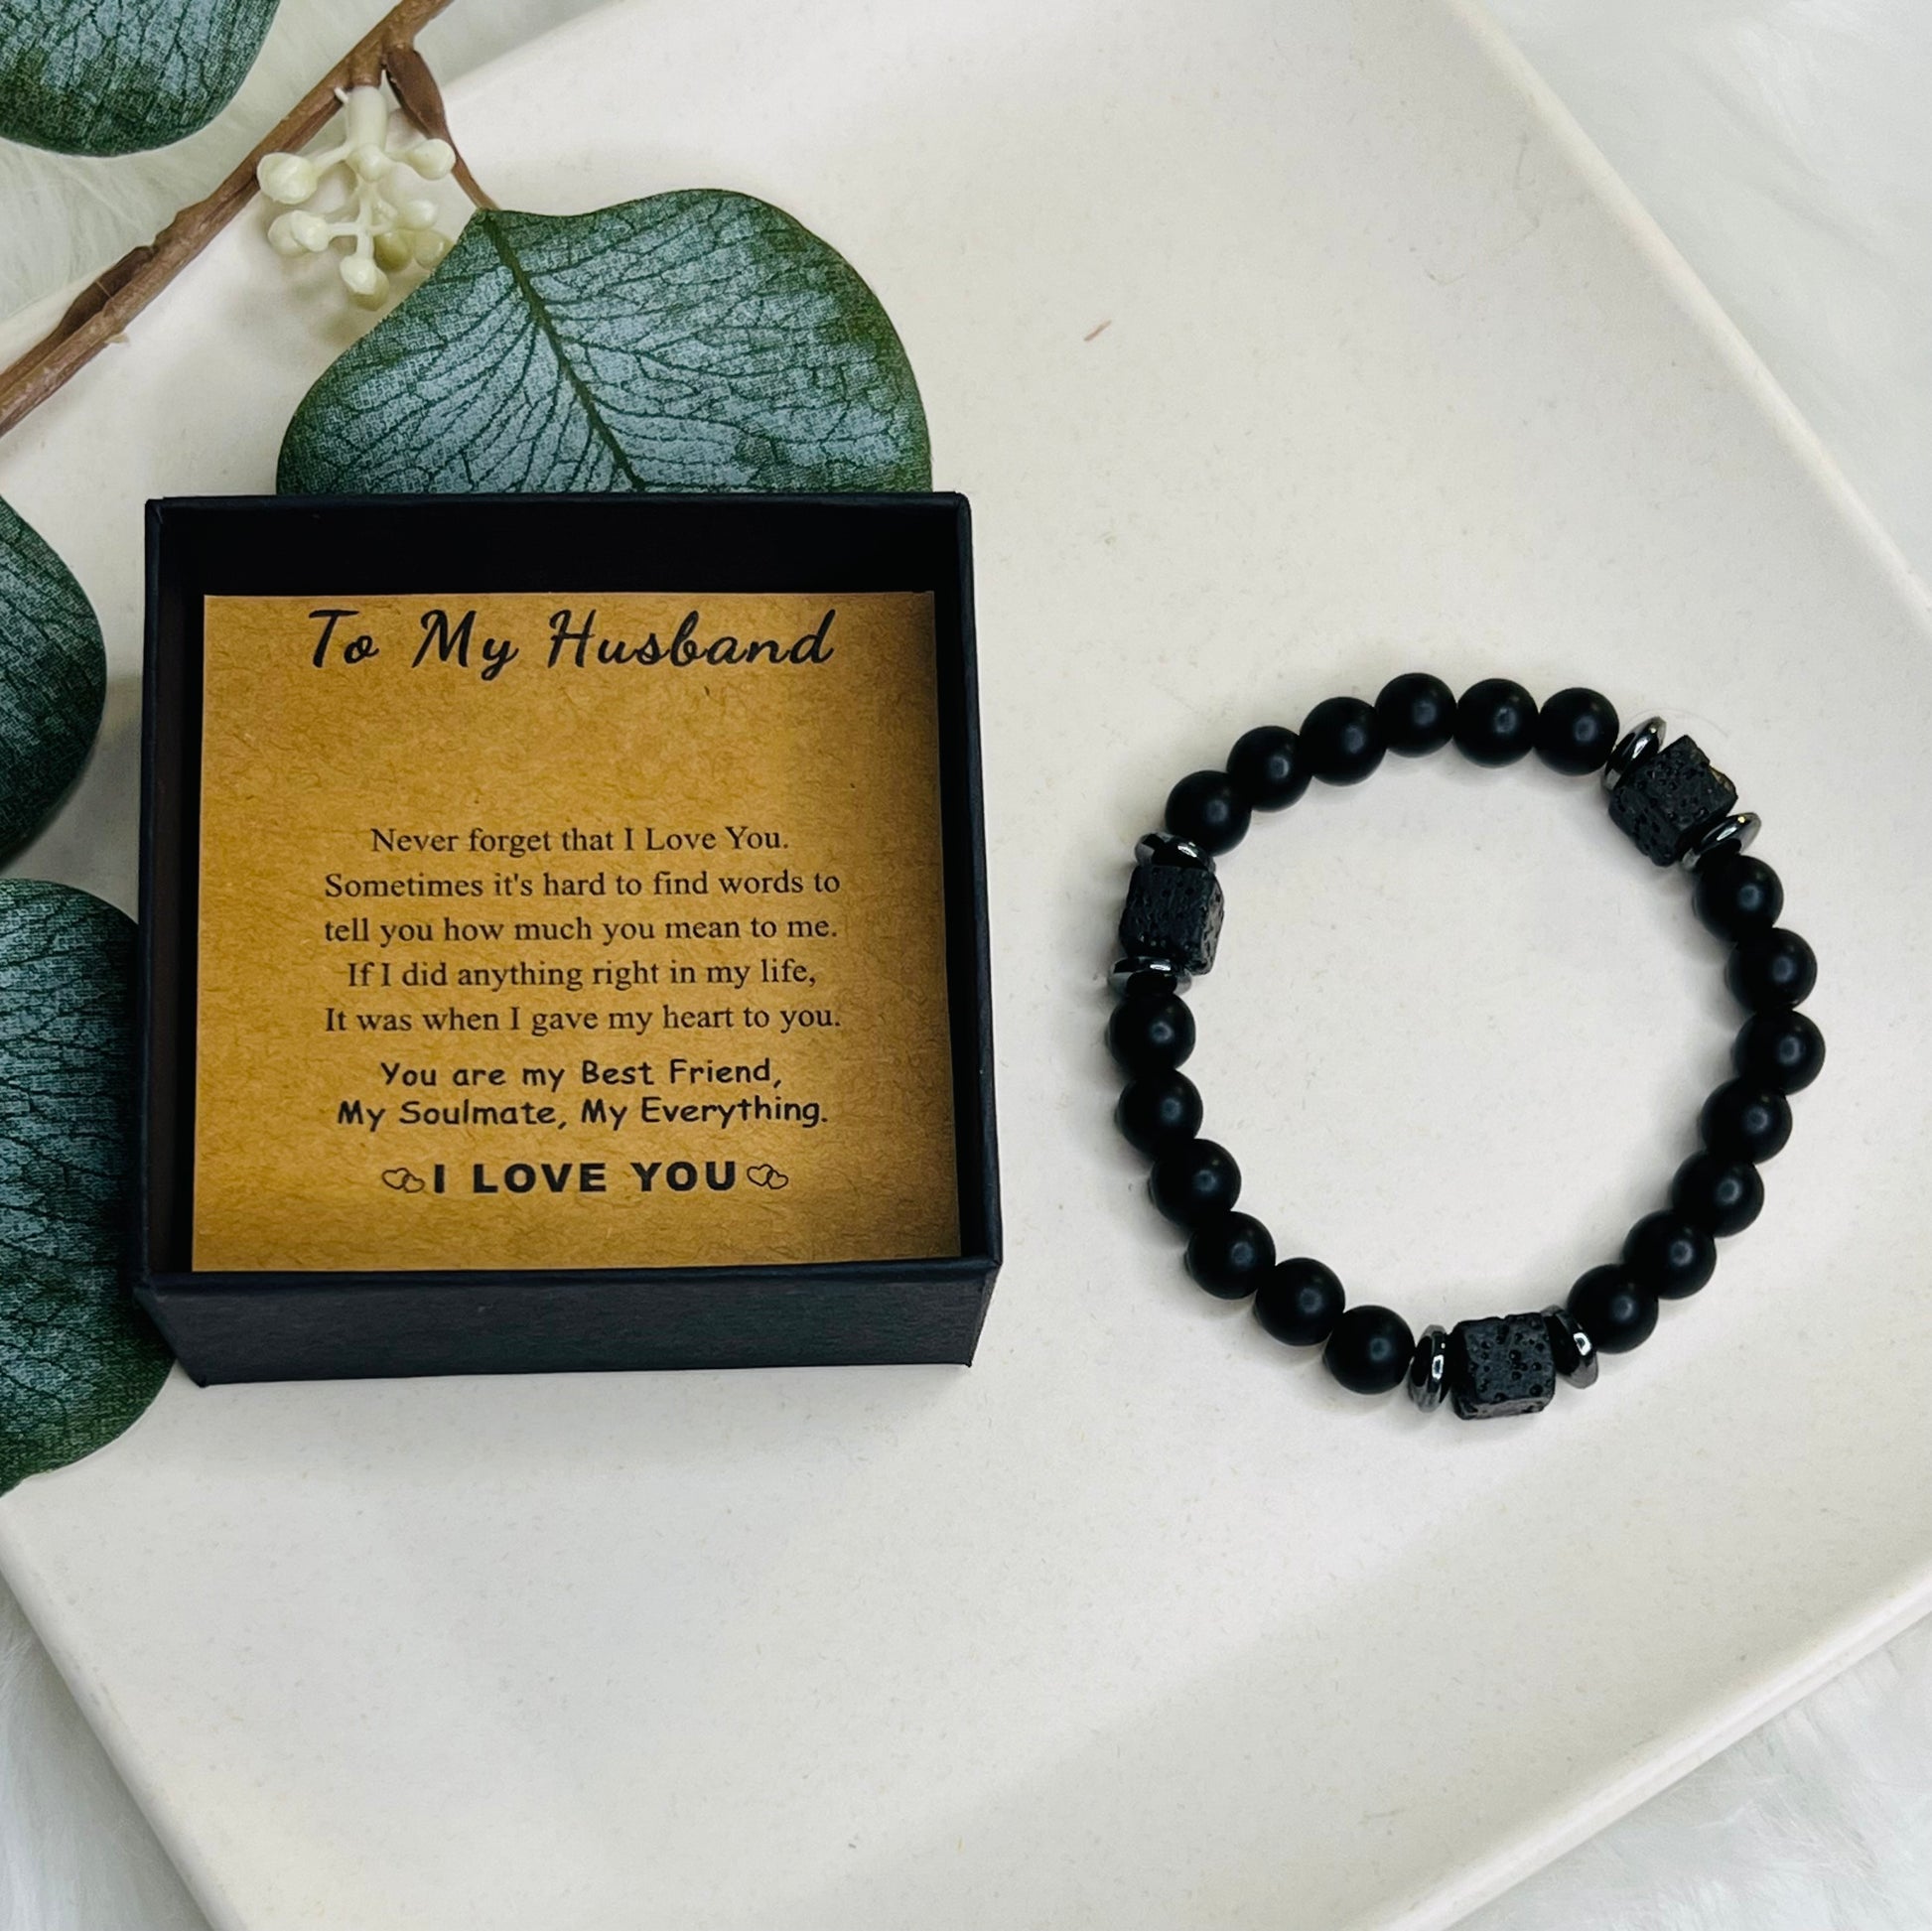 "To My Husband" Natural Stone Bead Bracelet with Card